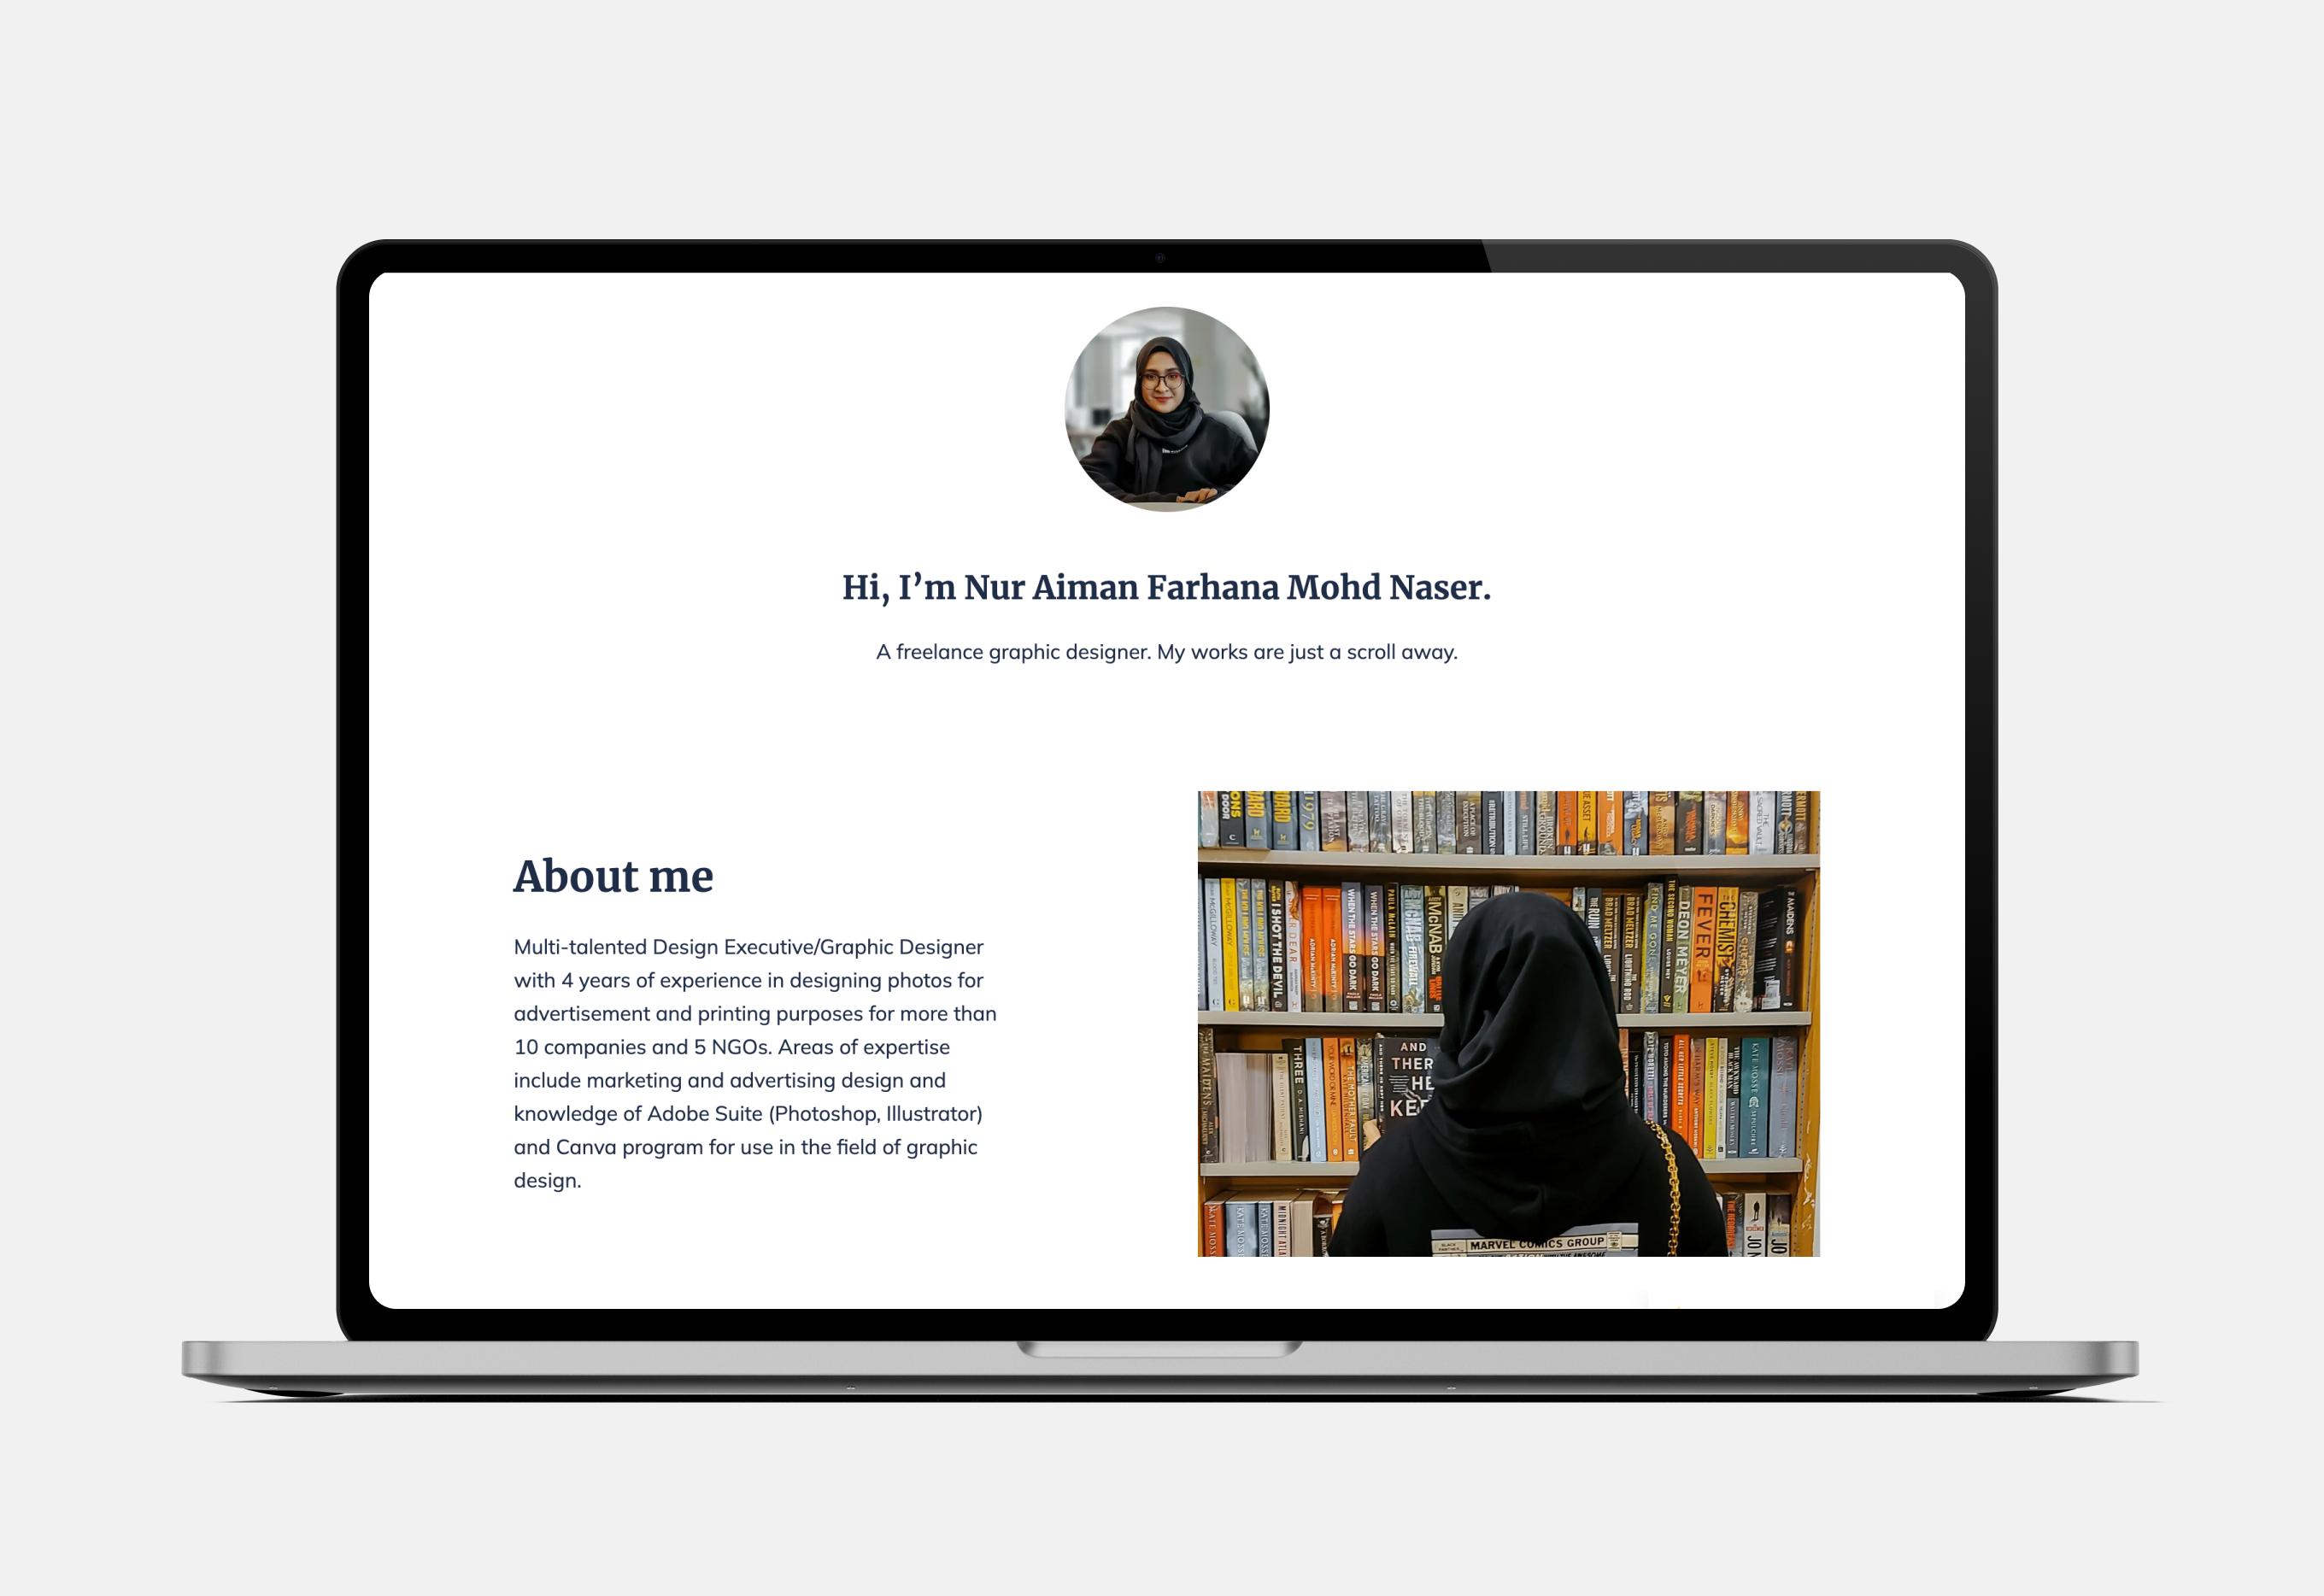 A sleek portfolio with a white background and black text. The header shows the author's name and photo. An about me section describes her work as a graphic designer.